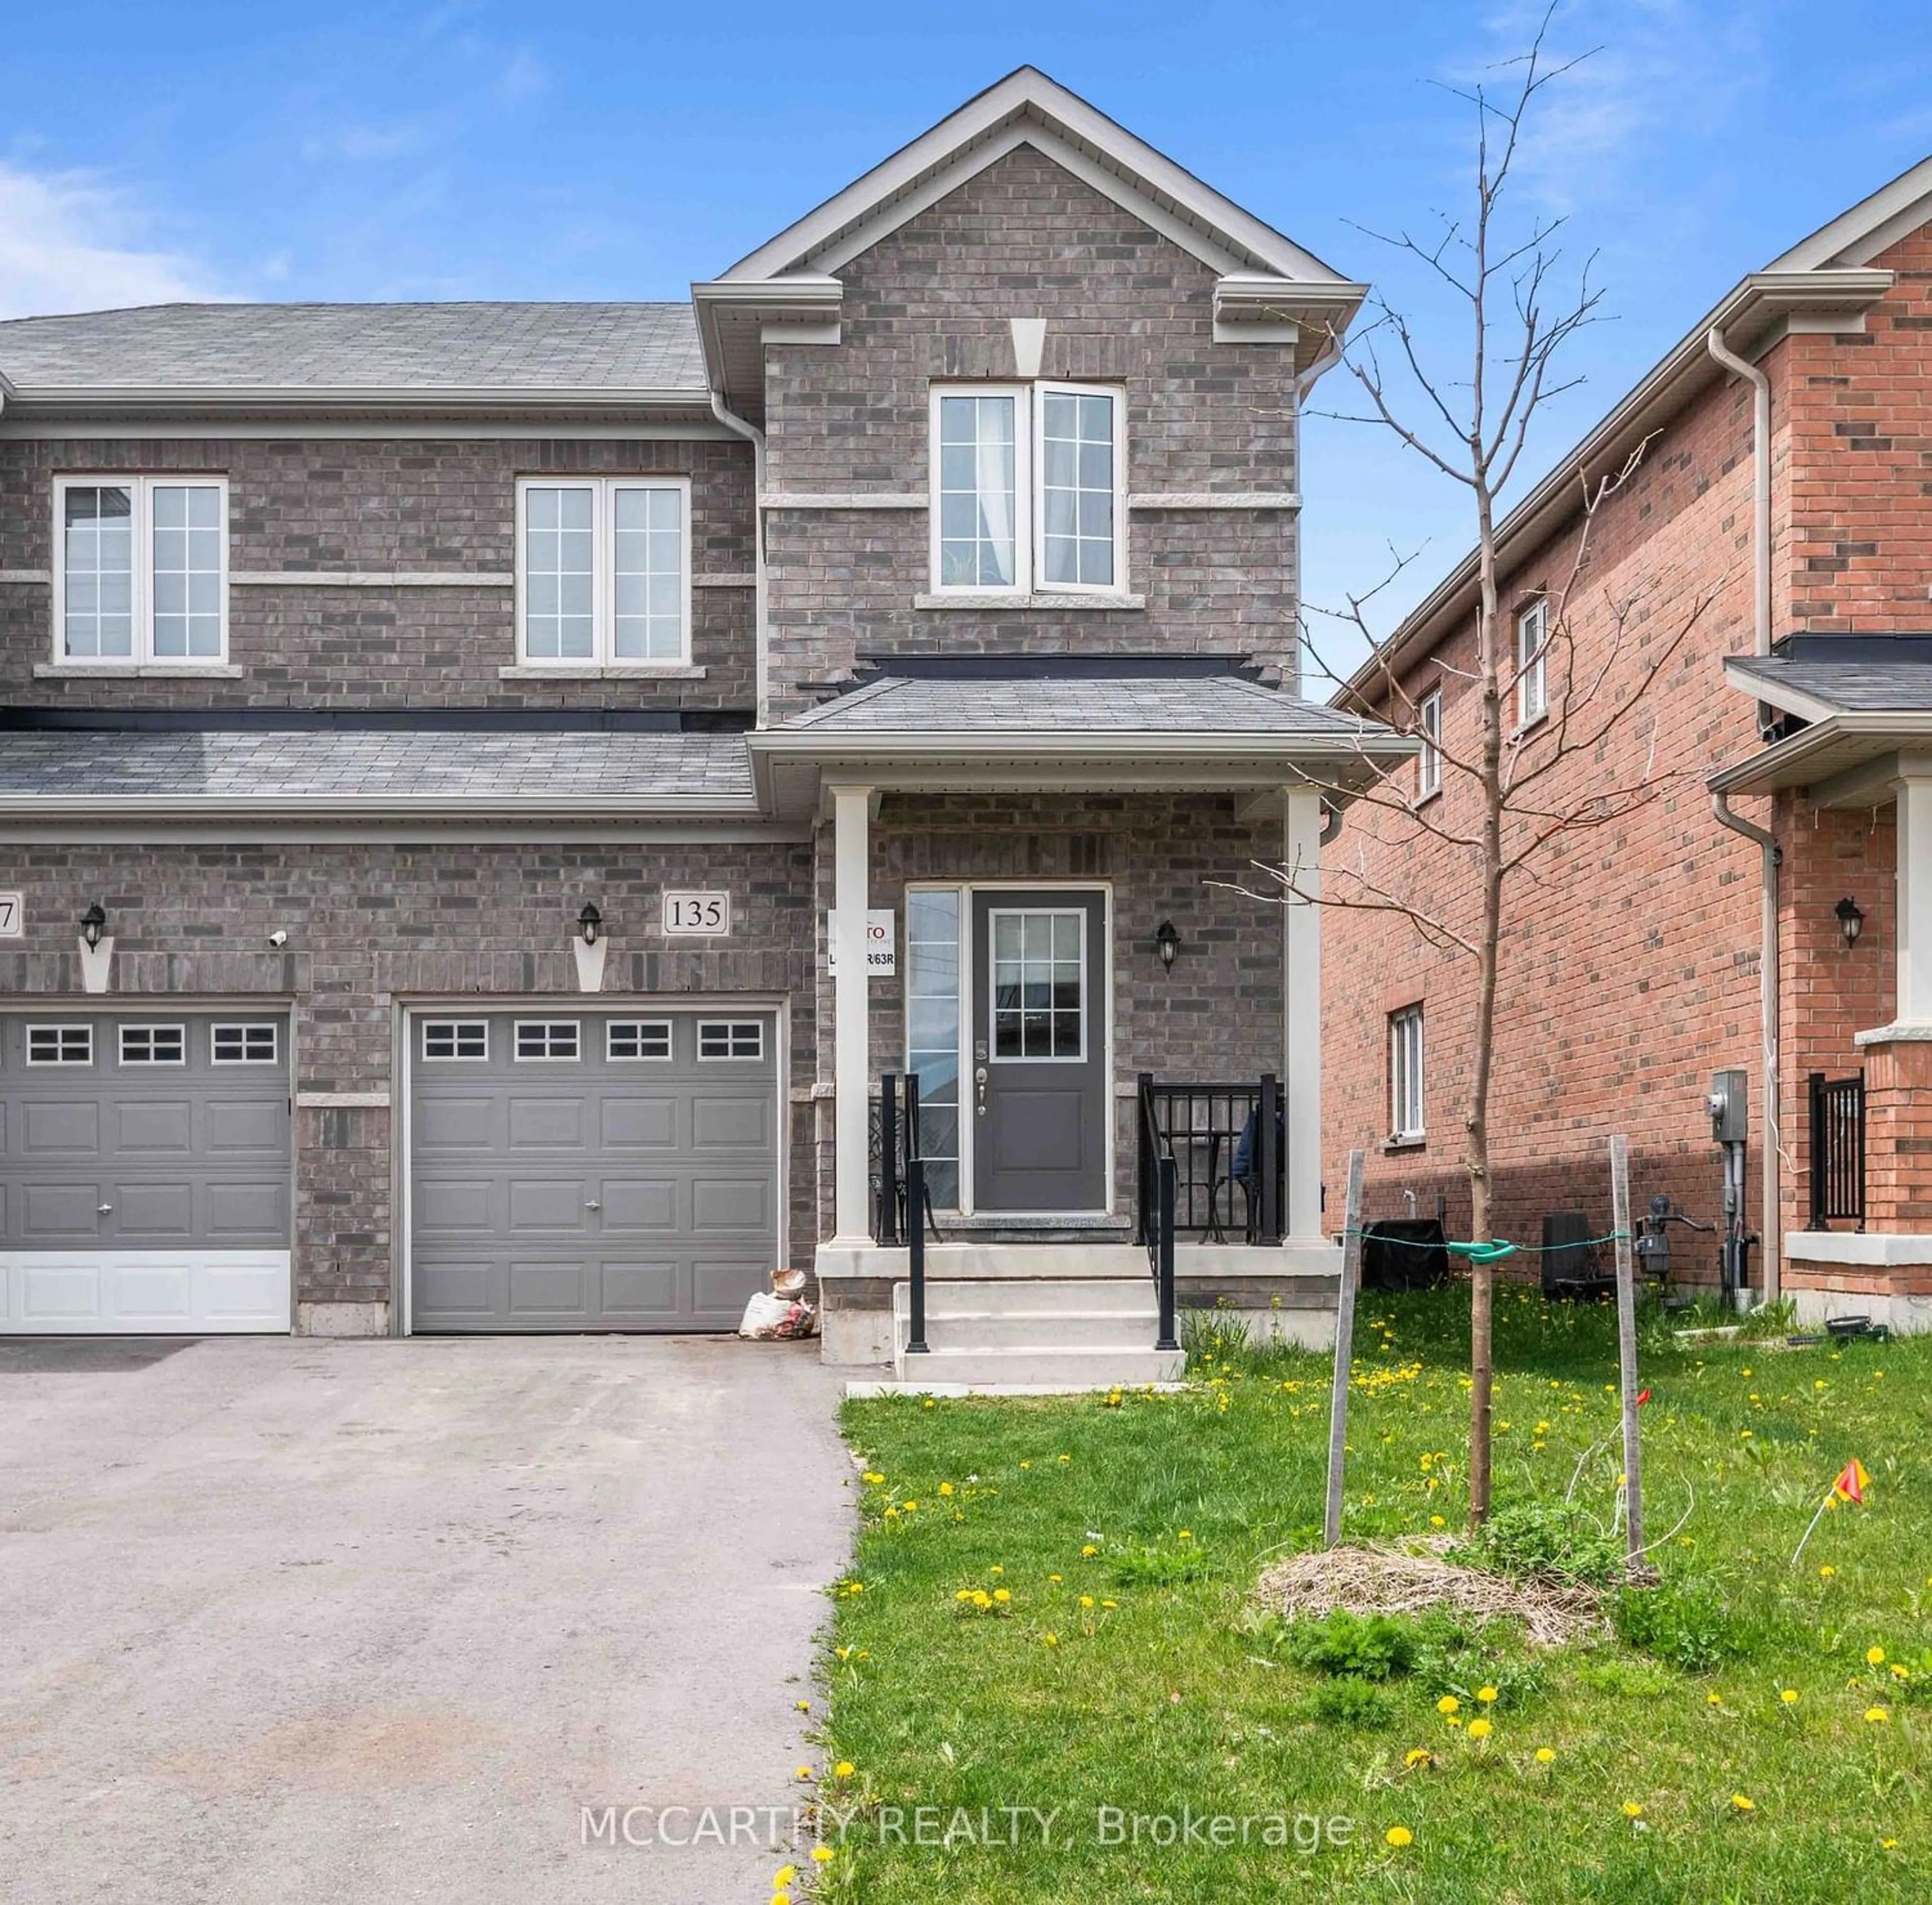 Home with brick exterior material for 135 Seeley Ave, Southgate Ontario N0C 1B0